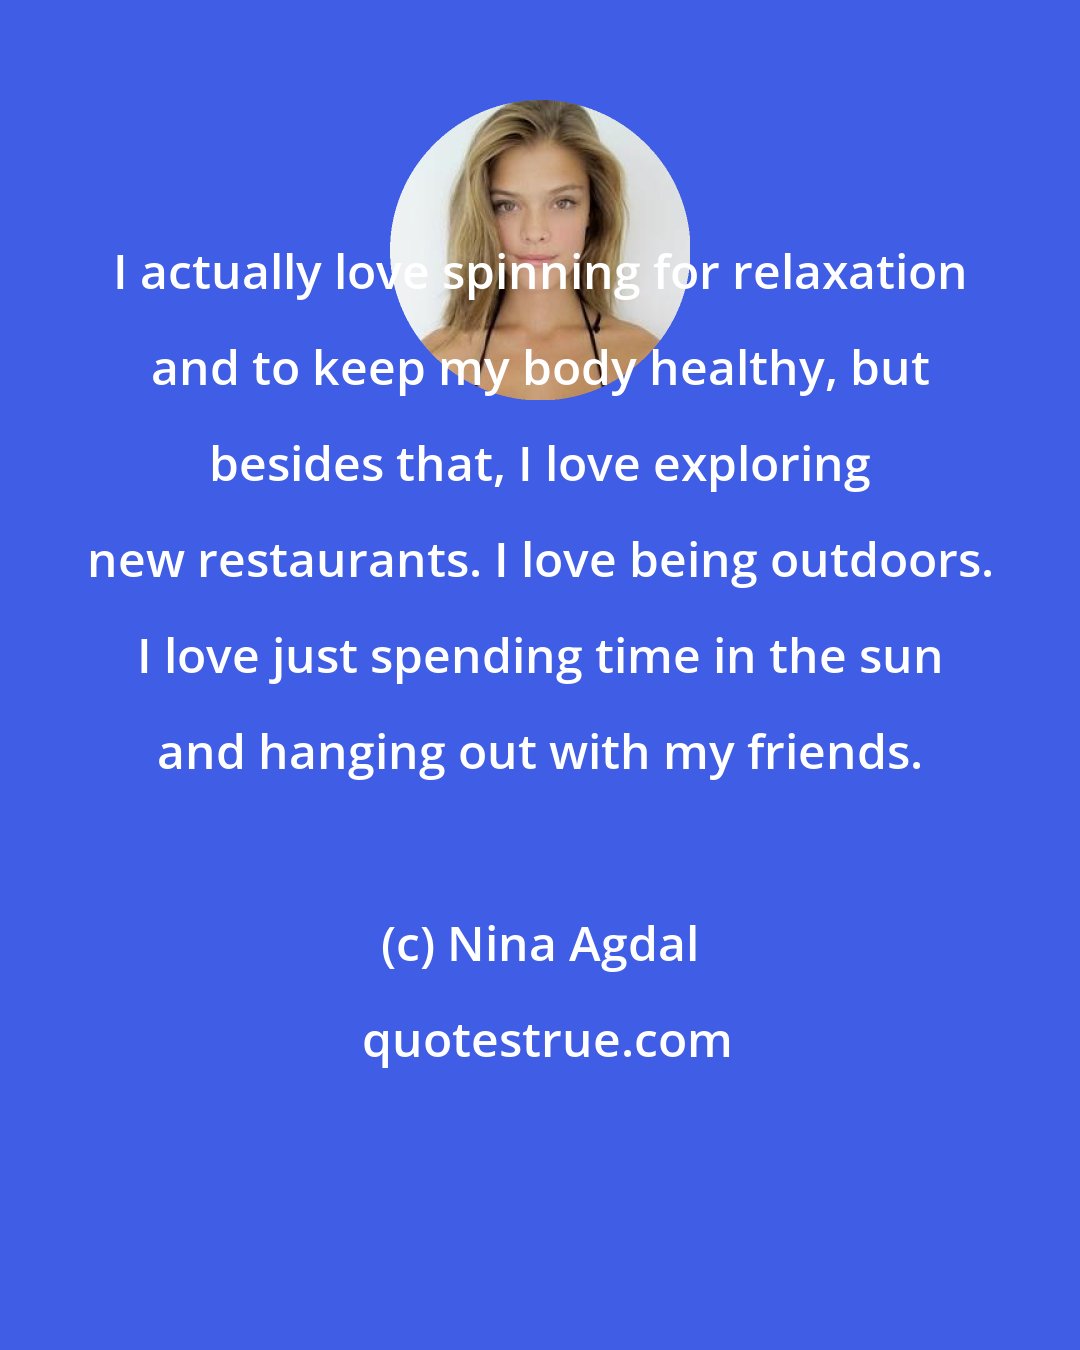 Nina Agdal: I actually love spinning for relaxation and to keep my body healthy, but besides that, I love exploring new restaurants. I love being outdoors. I love just spending time in the sun and hanging out with my friends.